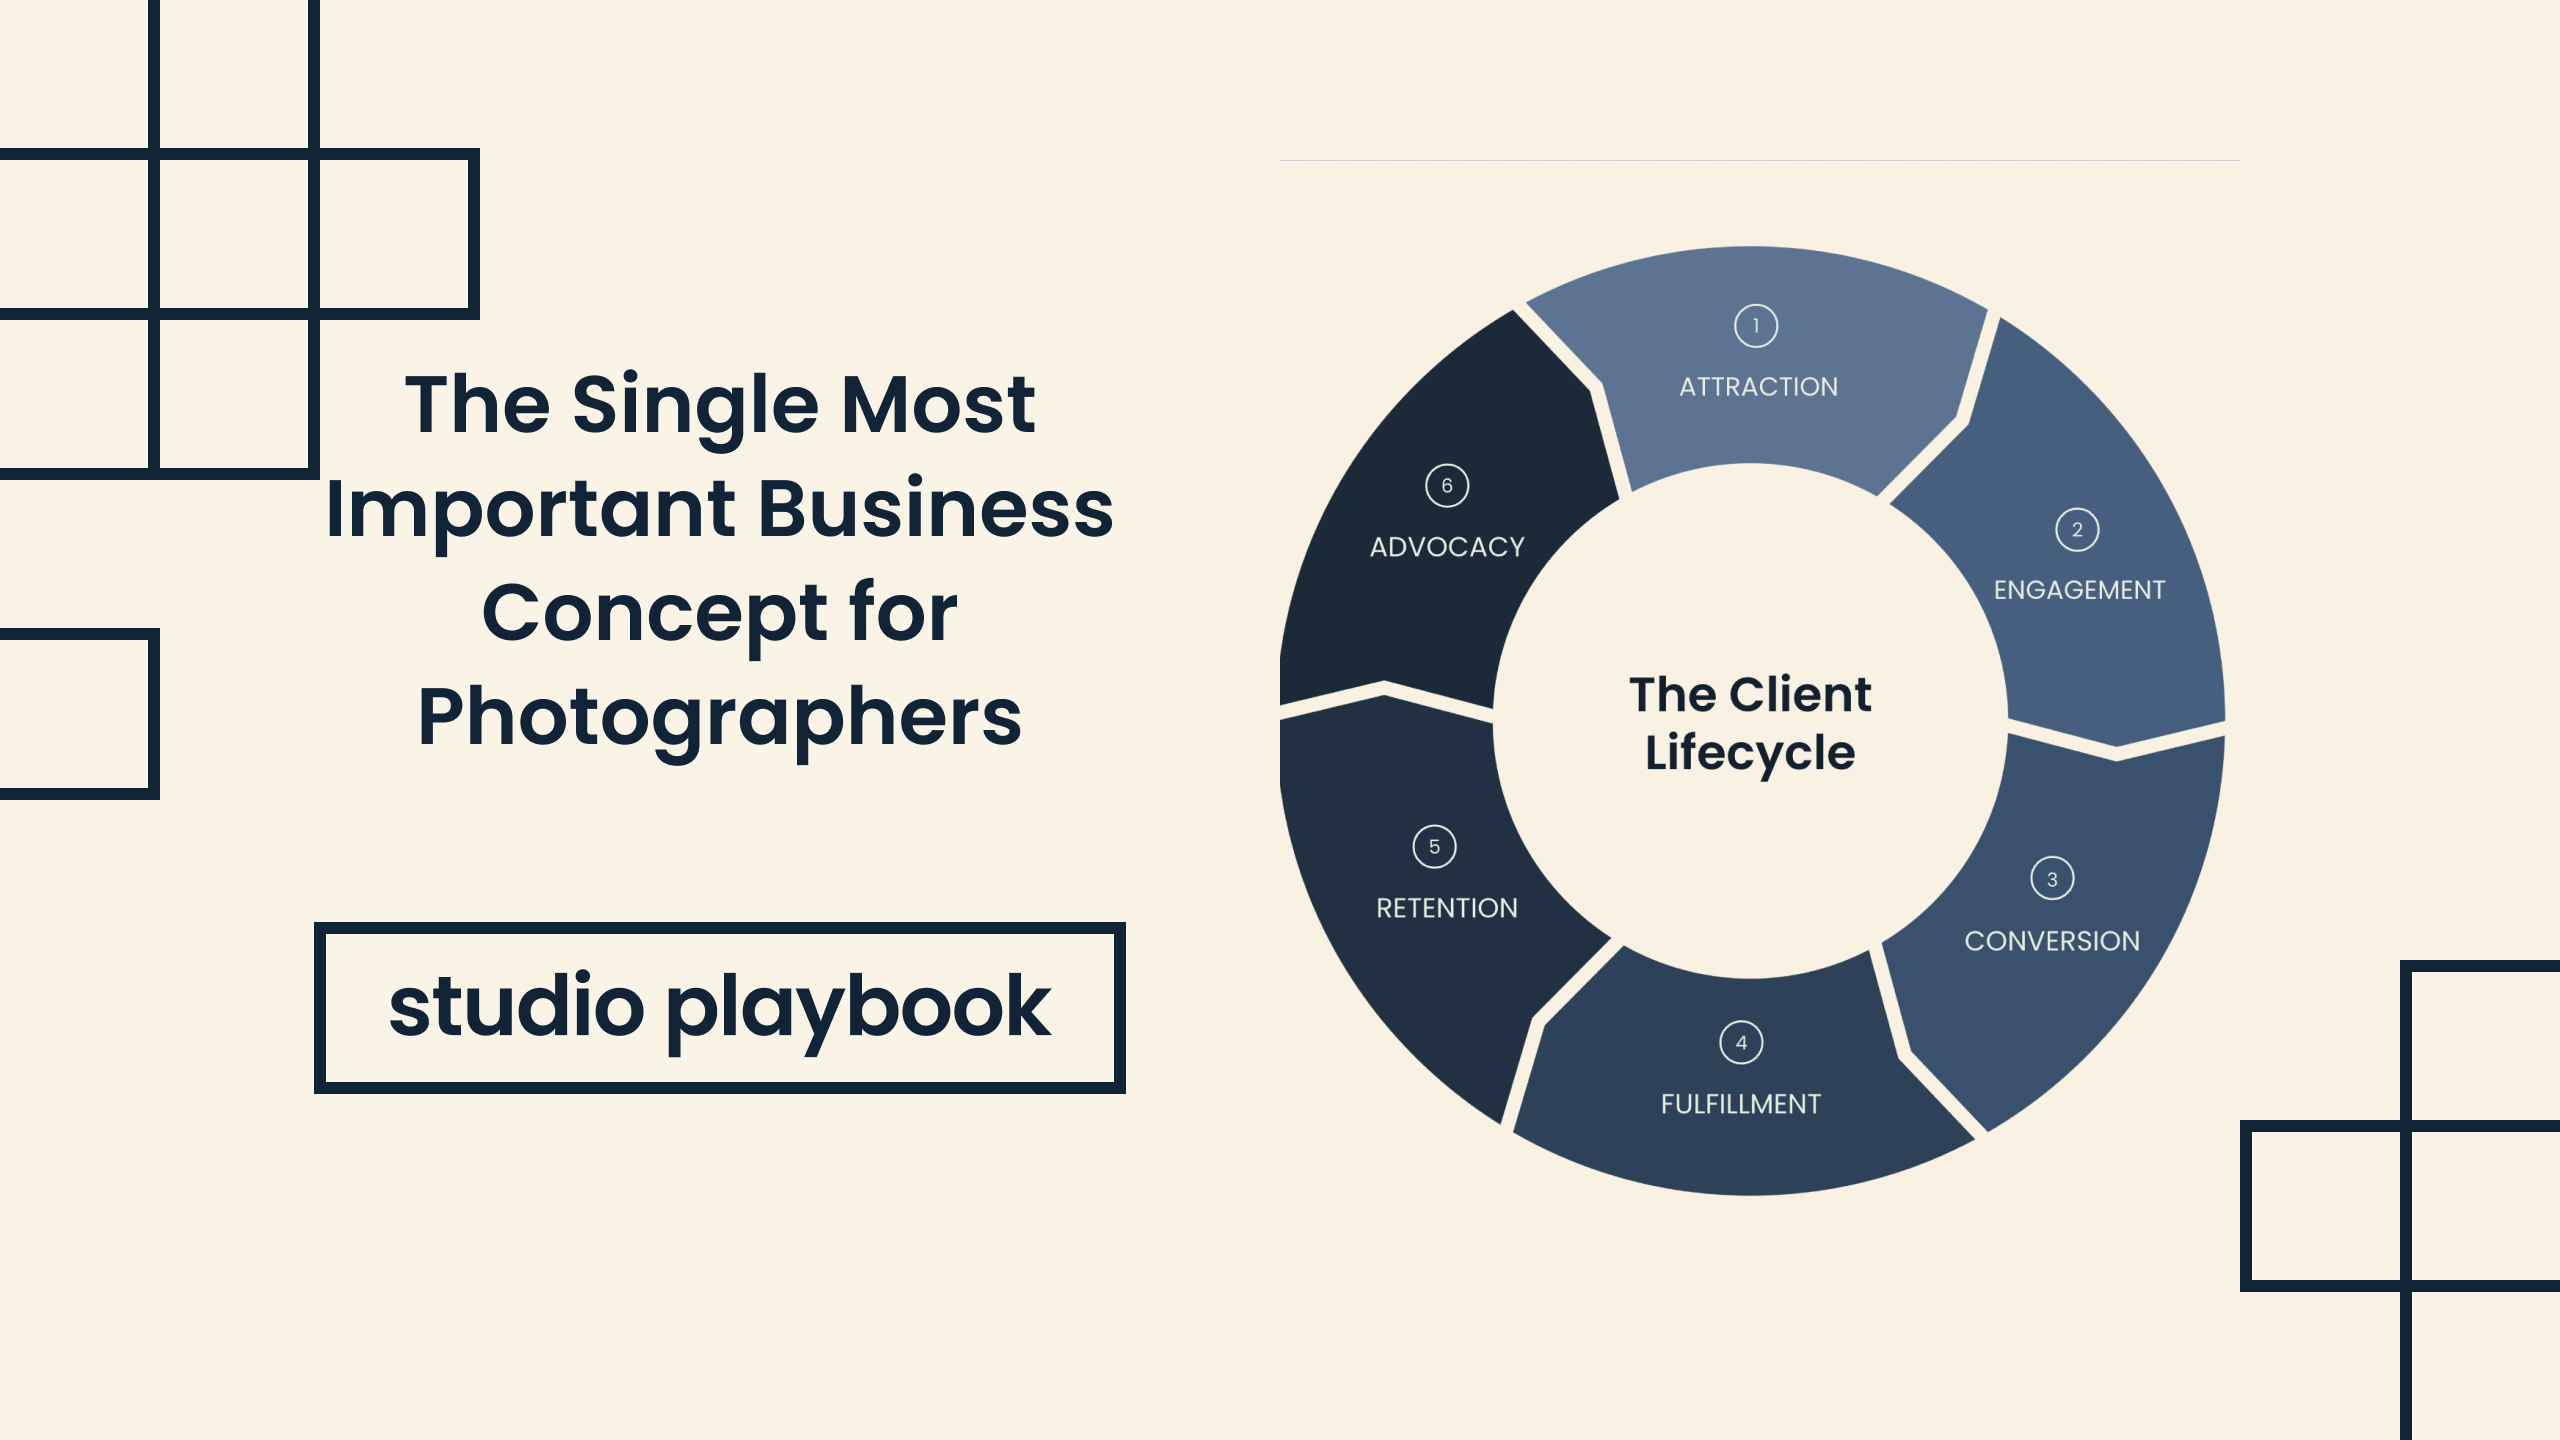 The Single Most Important Business Concept for Photographers & Event-Based Creatives